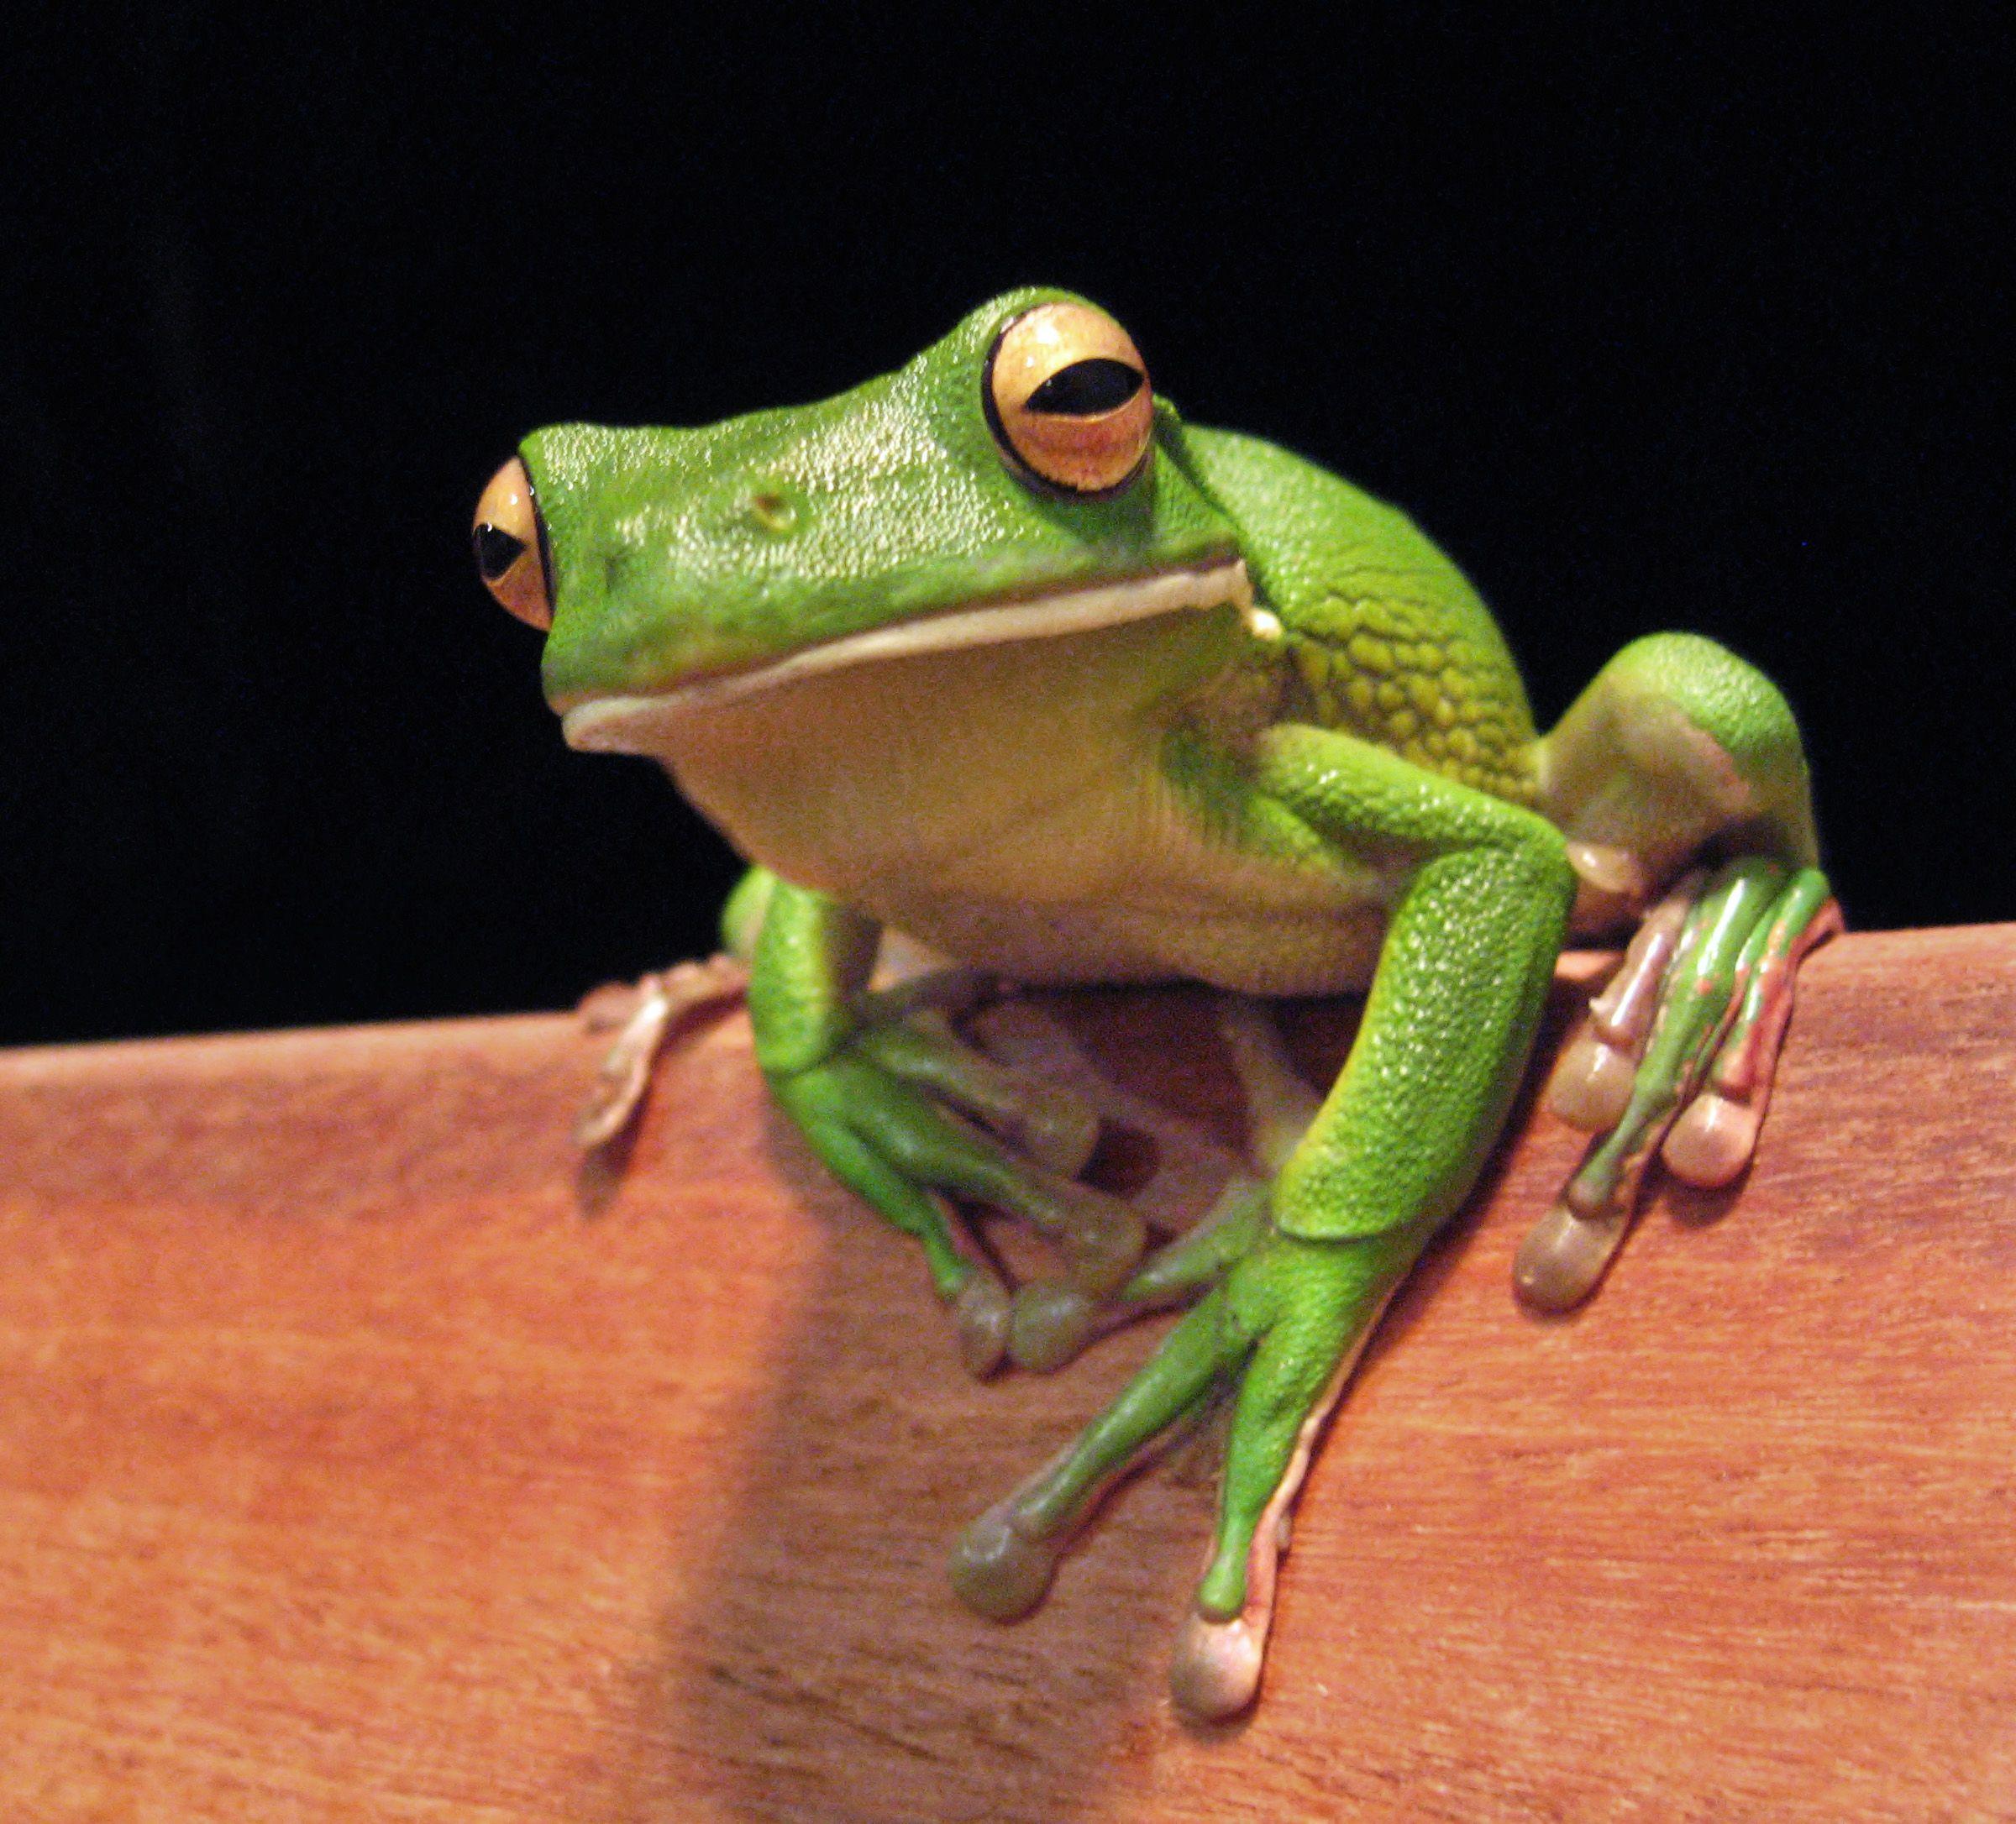 Citizen Scientists Identify Frogs with FrogWatch USA, Citizen